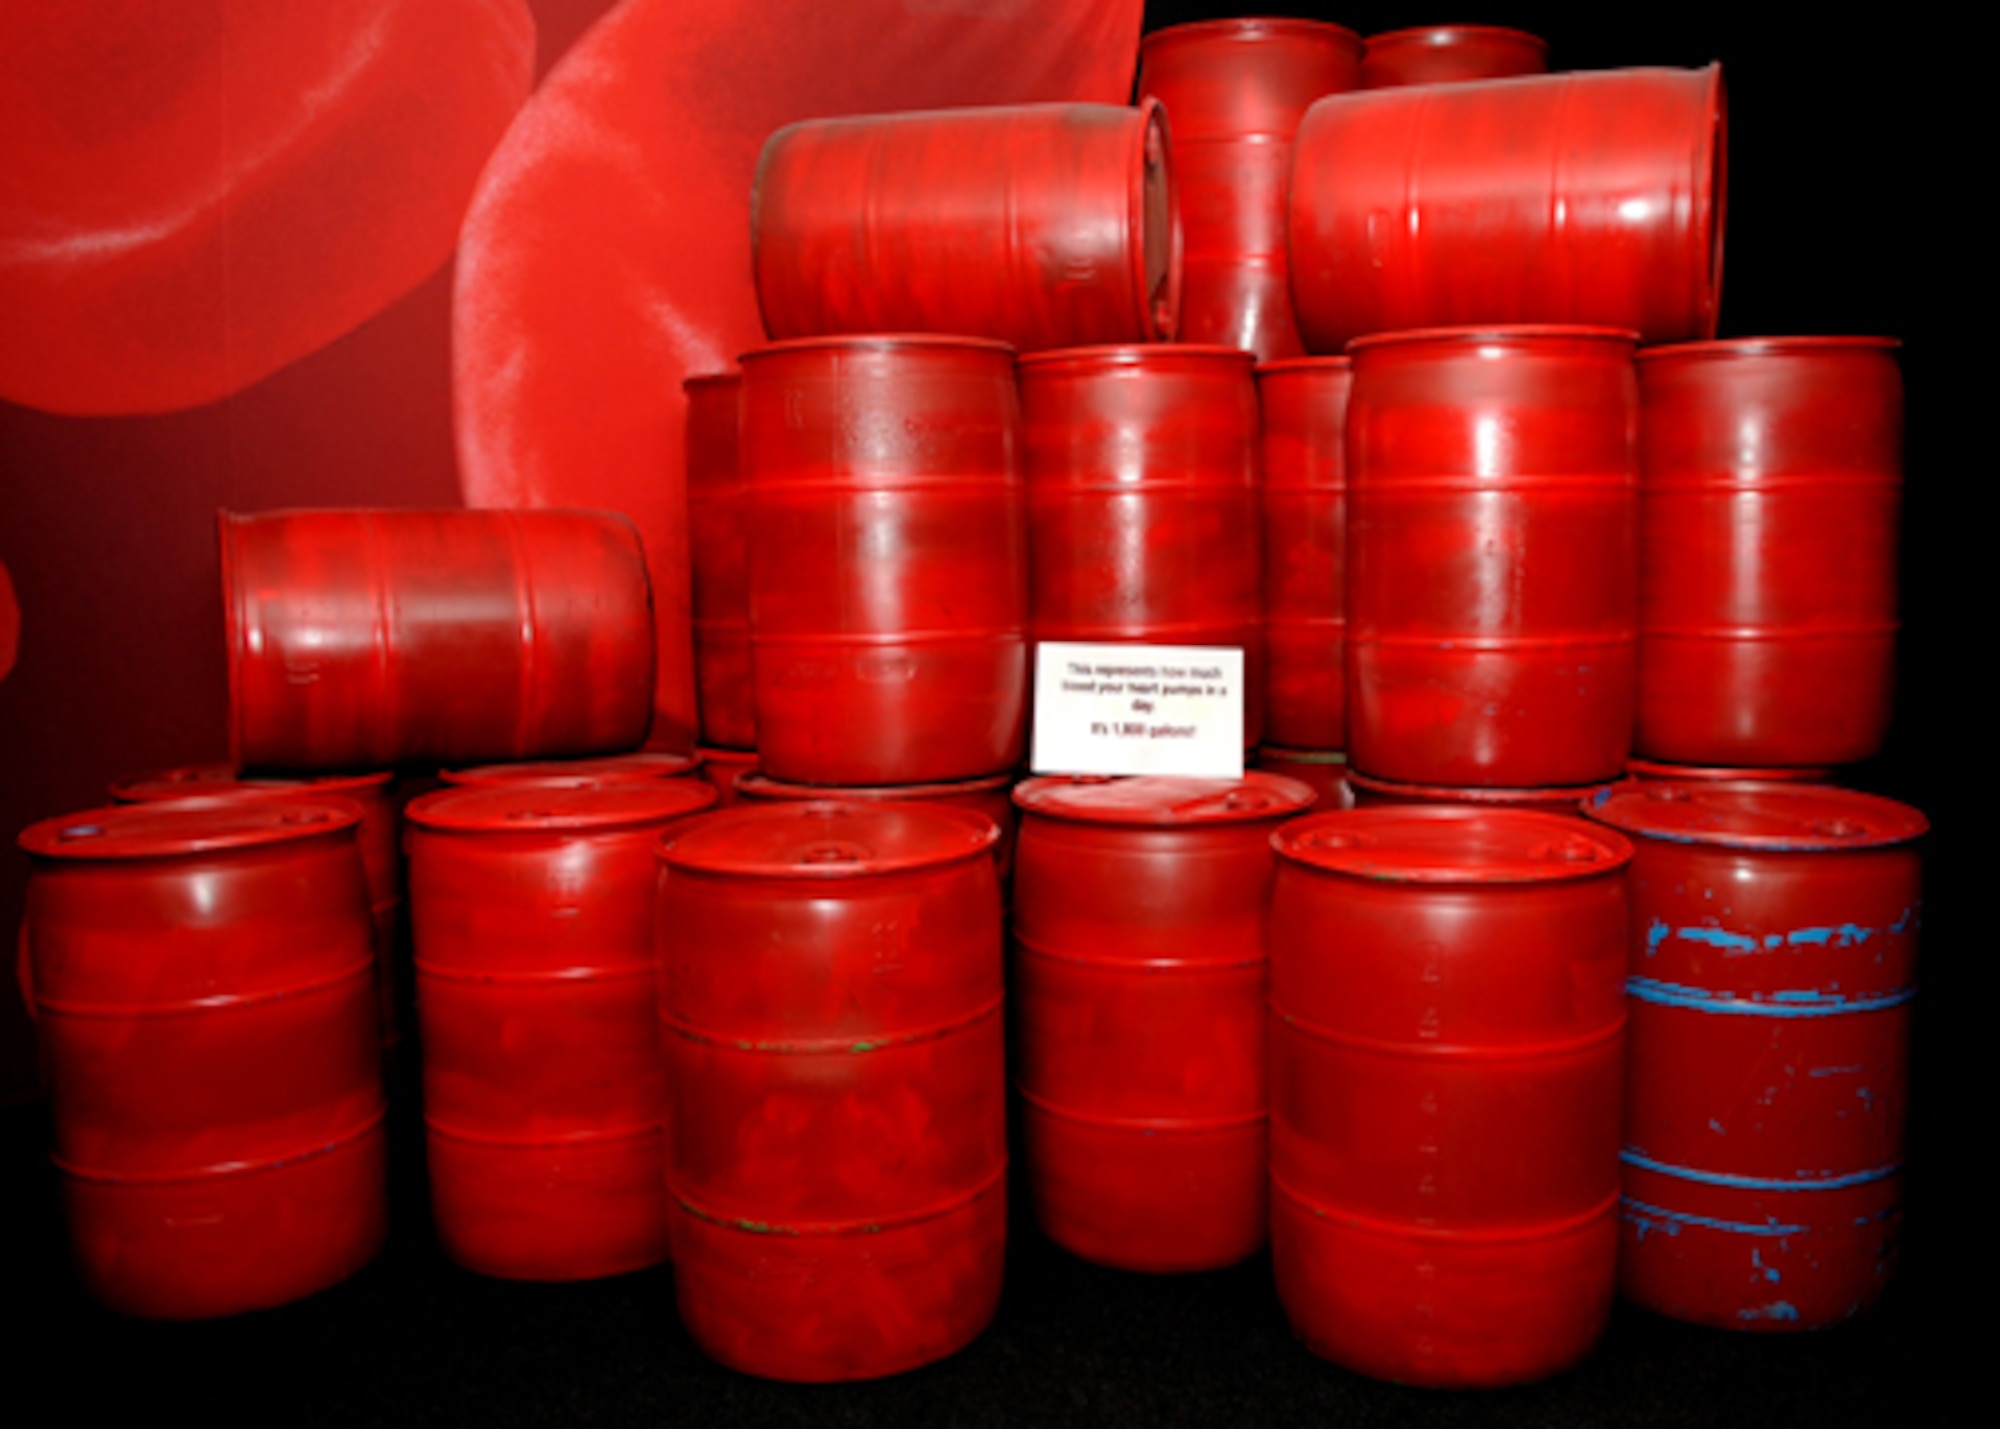 DENVER, Colo. -- At the Body Worlds and the Story of the Heart exhibit, these barrels provide and illustration of the 1,800 gallons of blood pumped by the human heart each day. (U.S. Air Force photo by Airman 1st Class Marcy Glass)